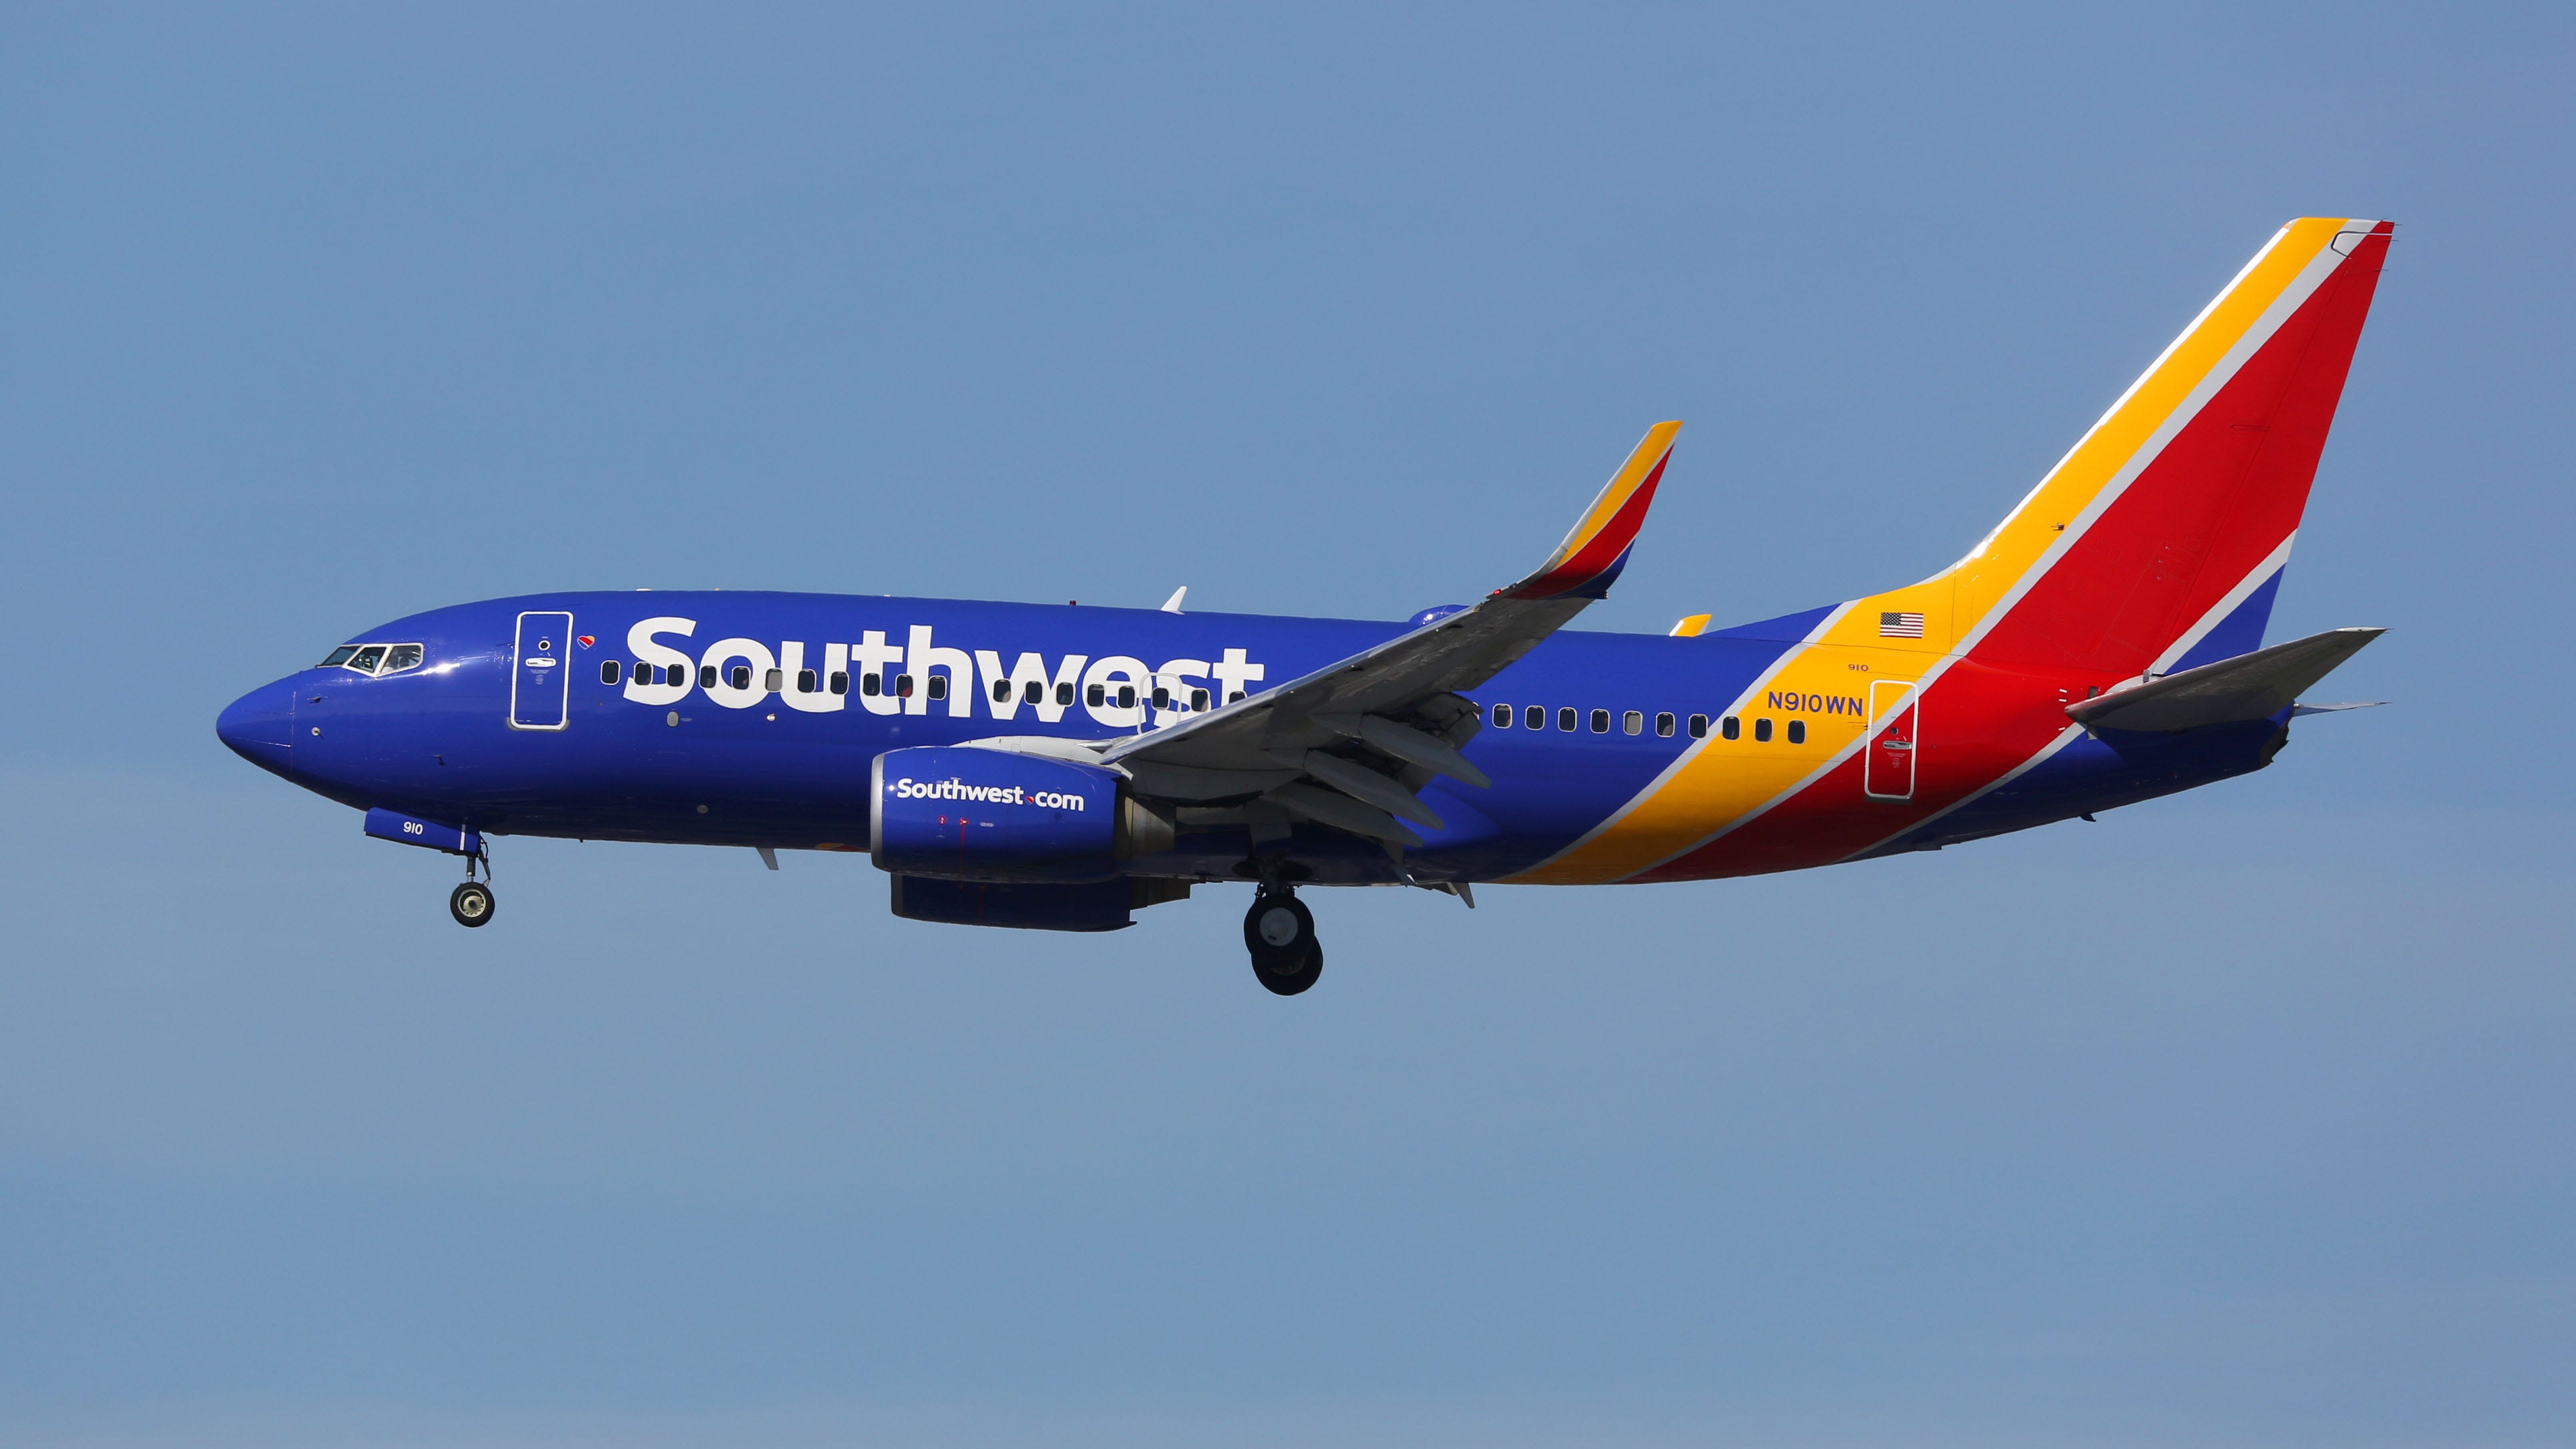 Ex-Southwest Airlines pilot facing federal charges after allegedly committing ‘obscene sexual act’ during flight